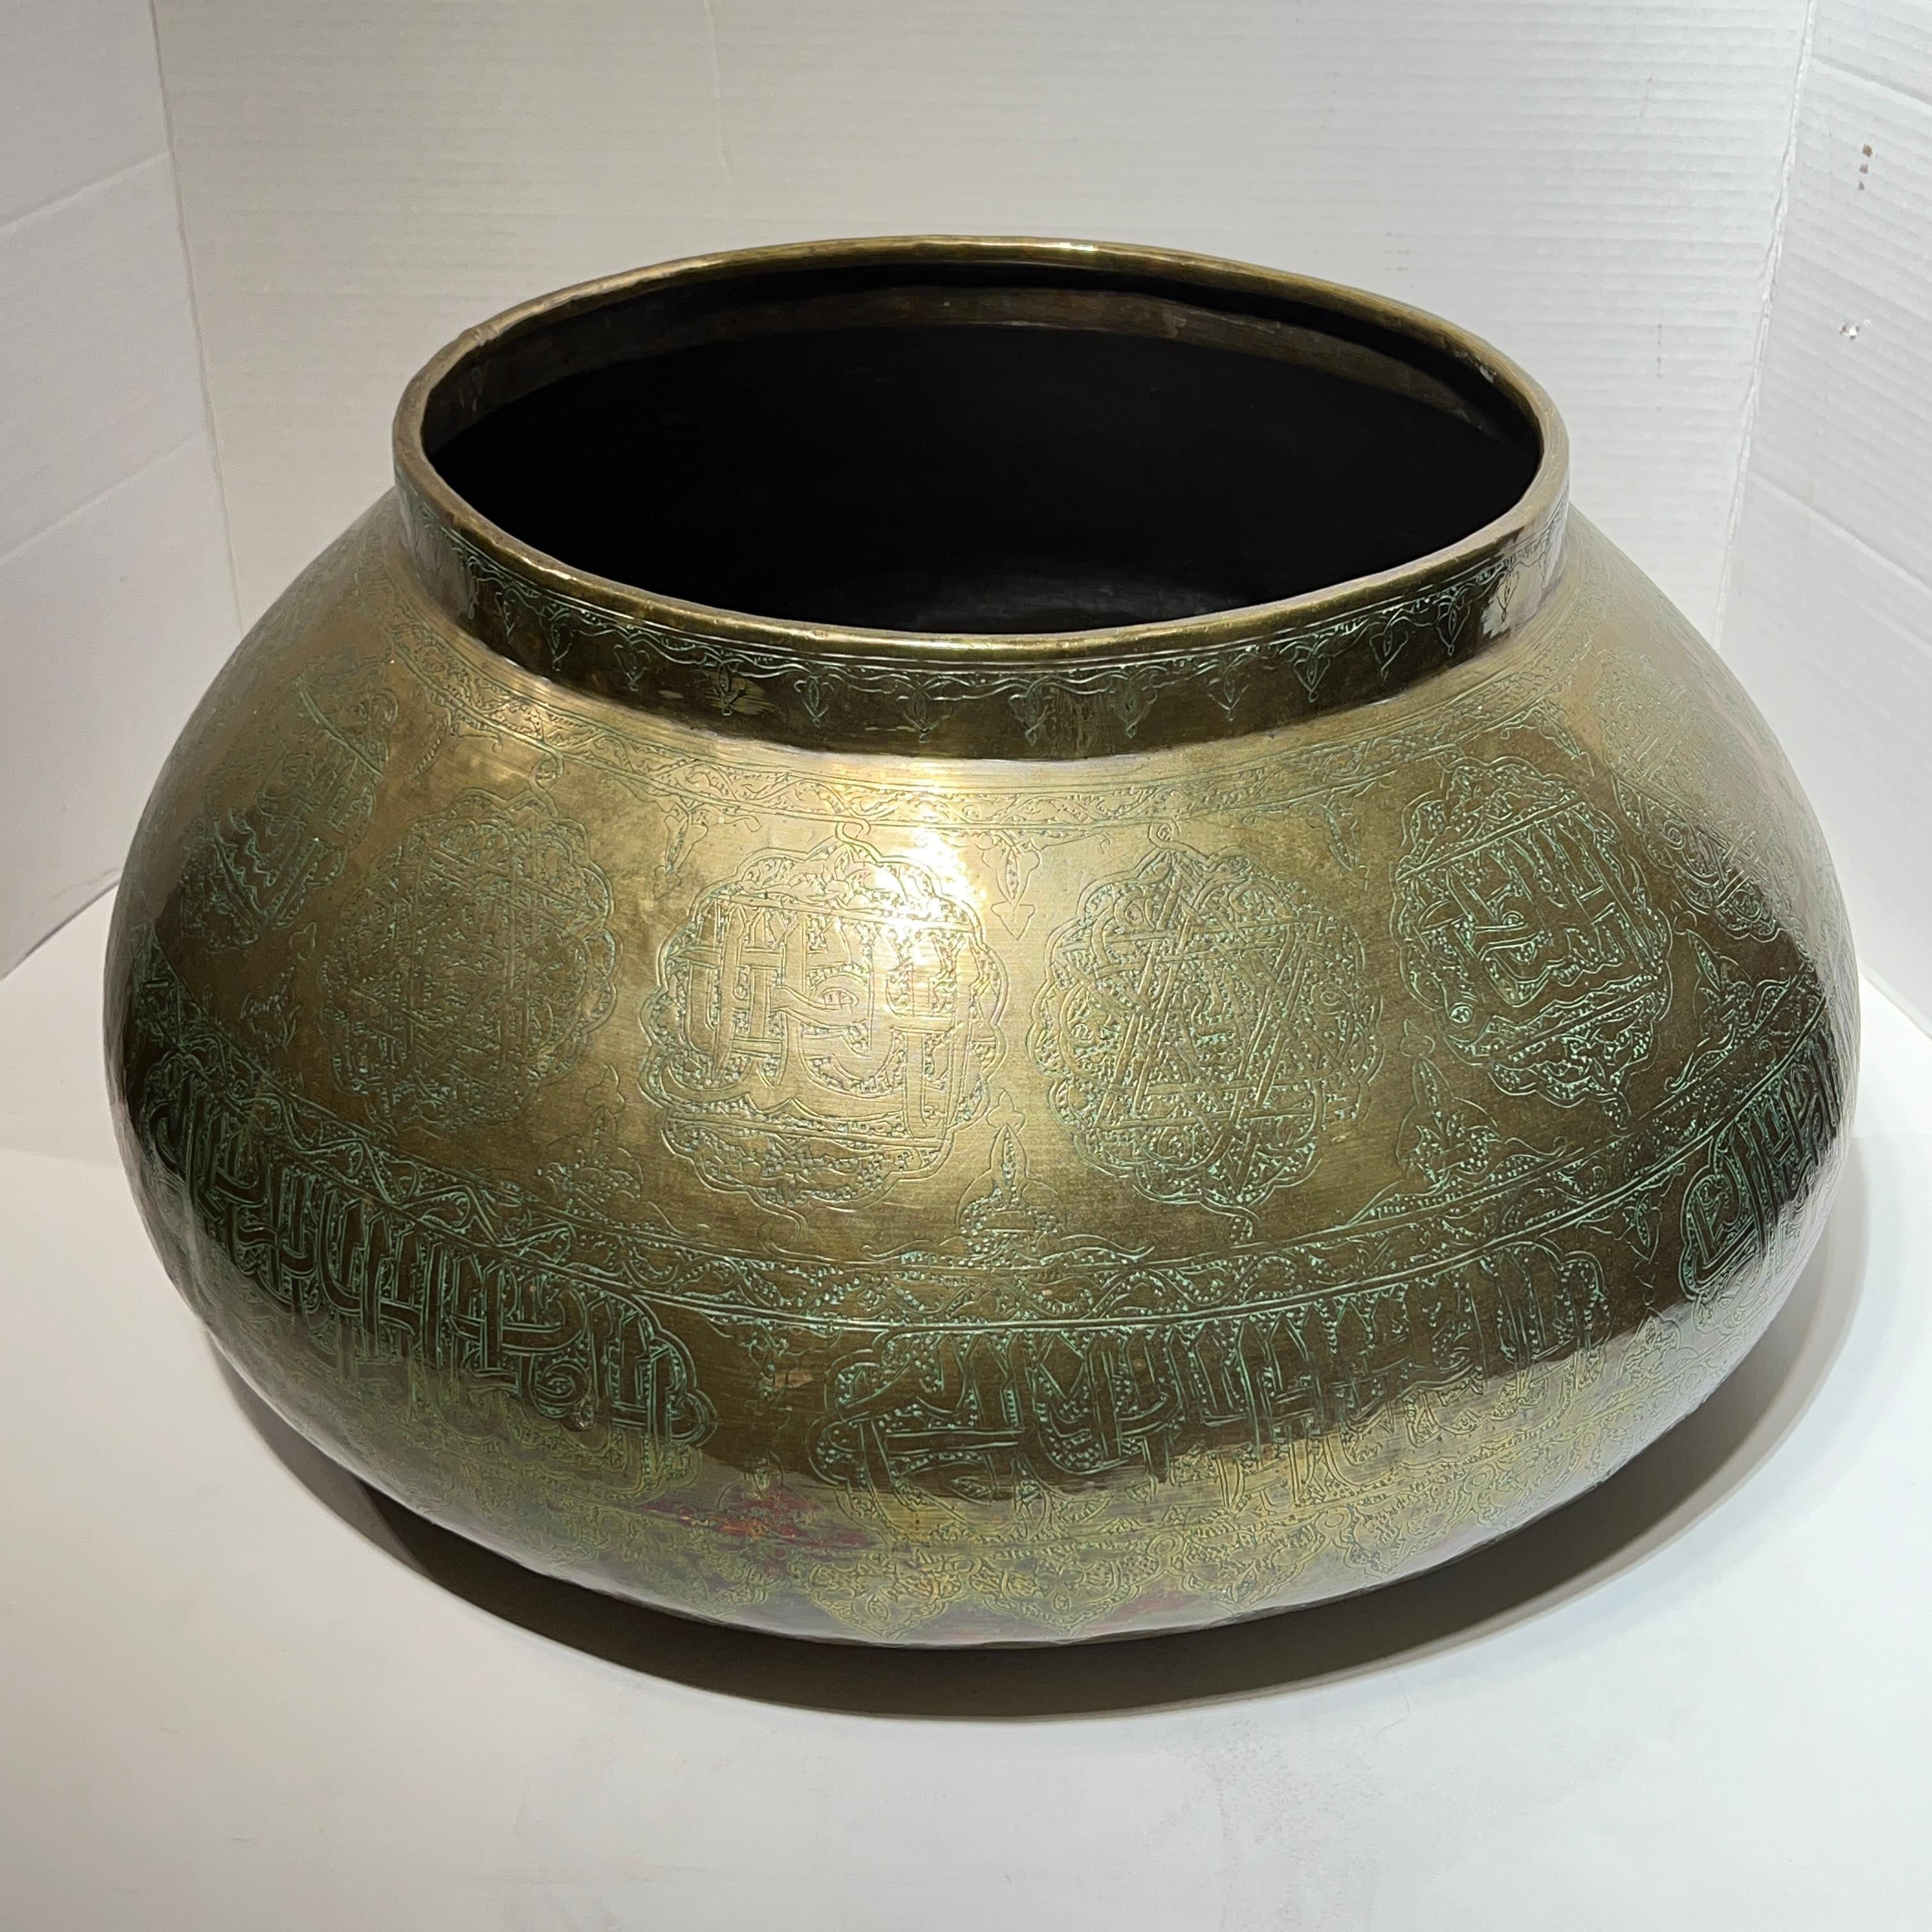 Very large, hand-hammered Islamic brass bowl with fine engraved calligraphy and poetry in Arabic measuring 20.5 inches across and 11 inches tall.